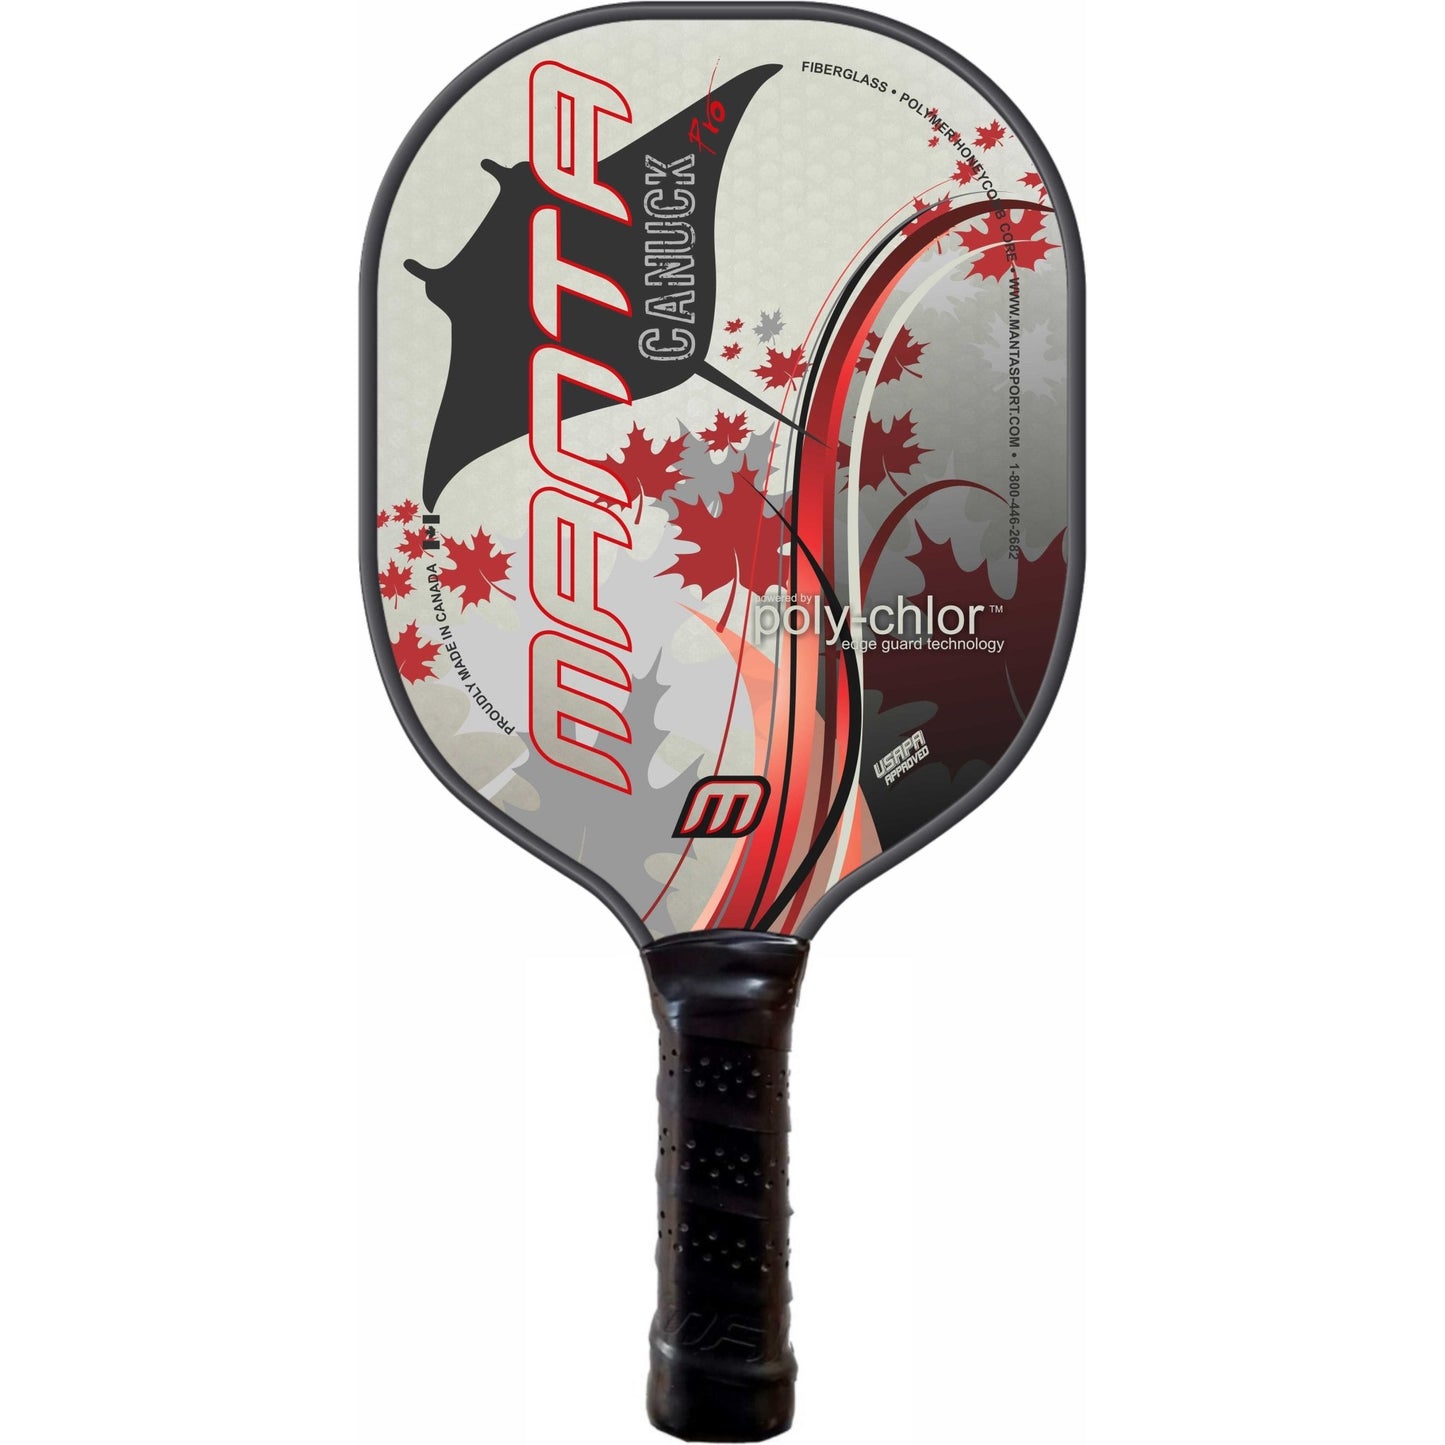 CANUCK PRO PROVINCIAL EDITION - Grip On Golf & Pickleball Zone